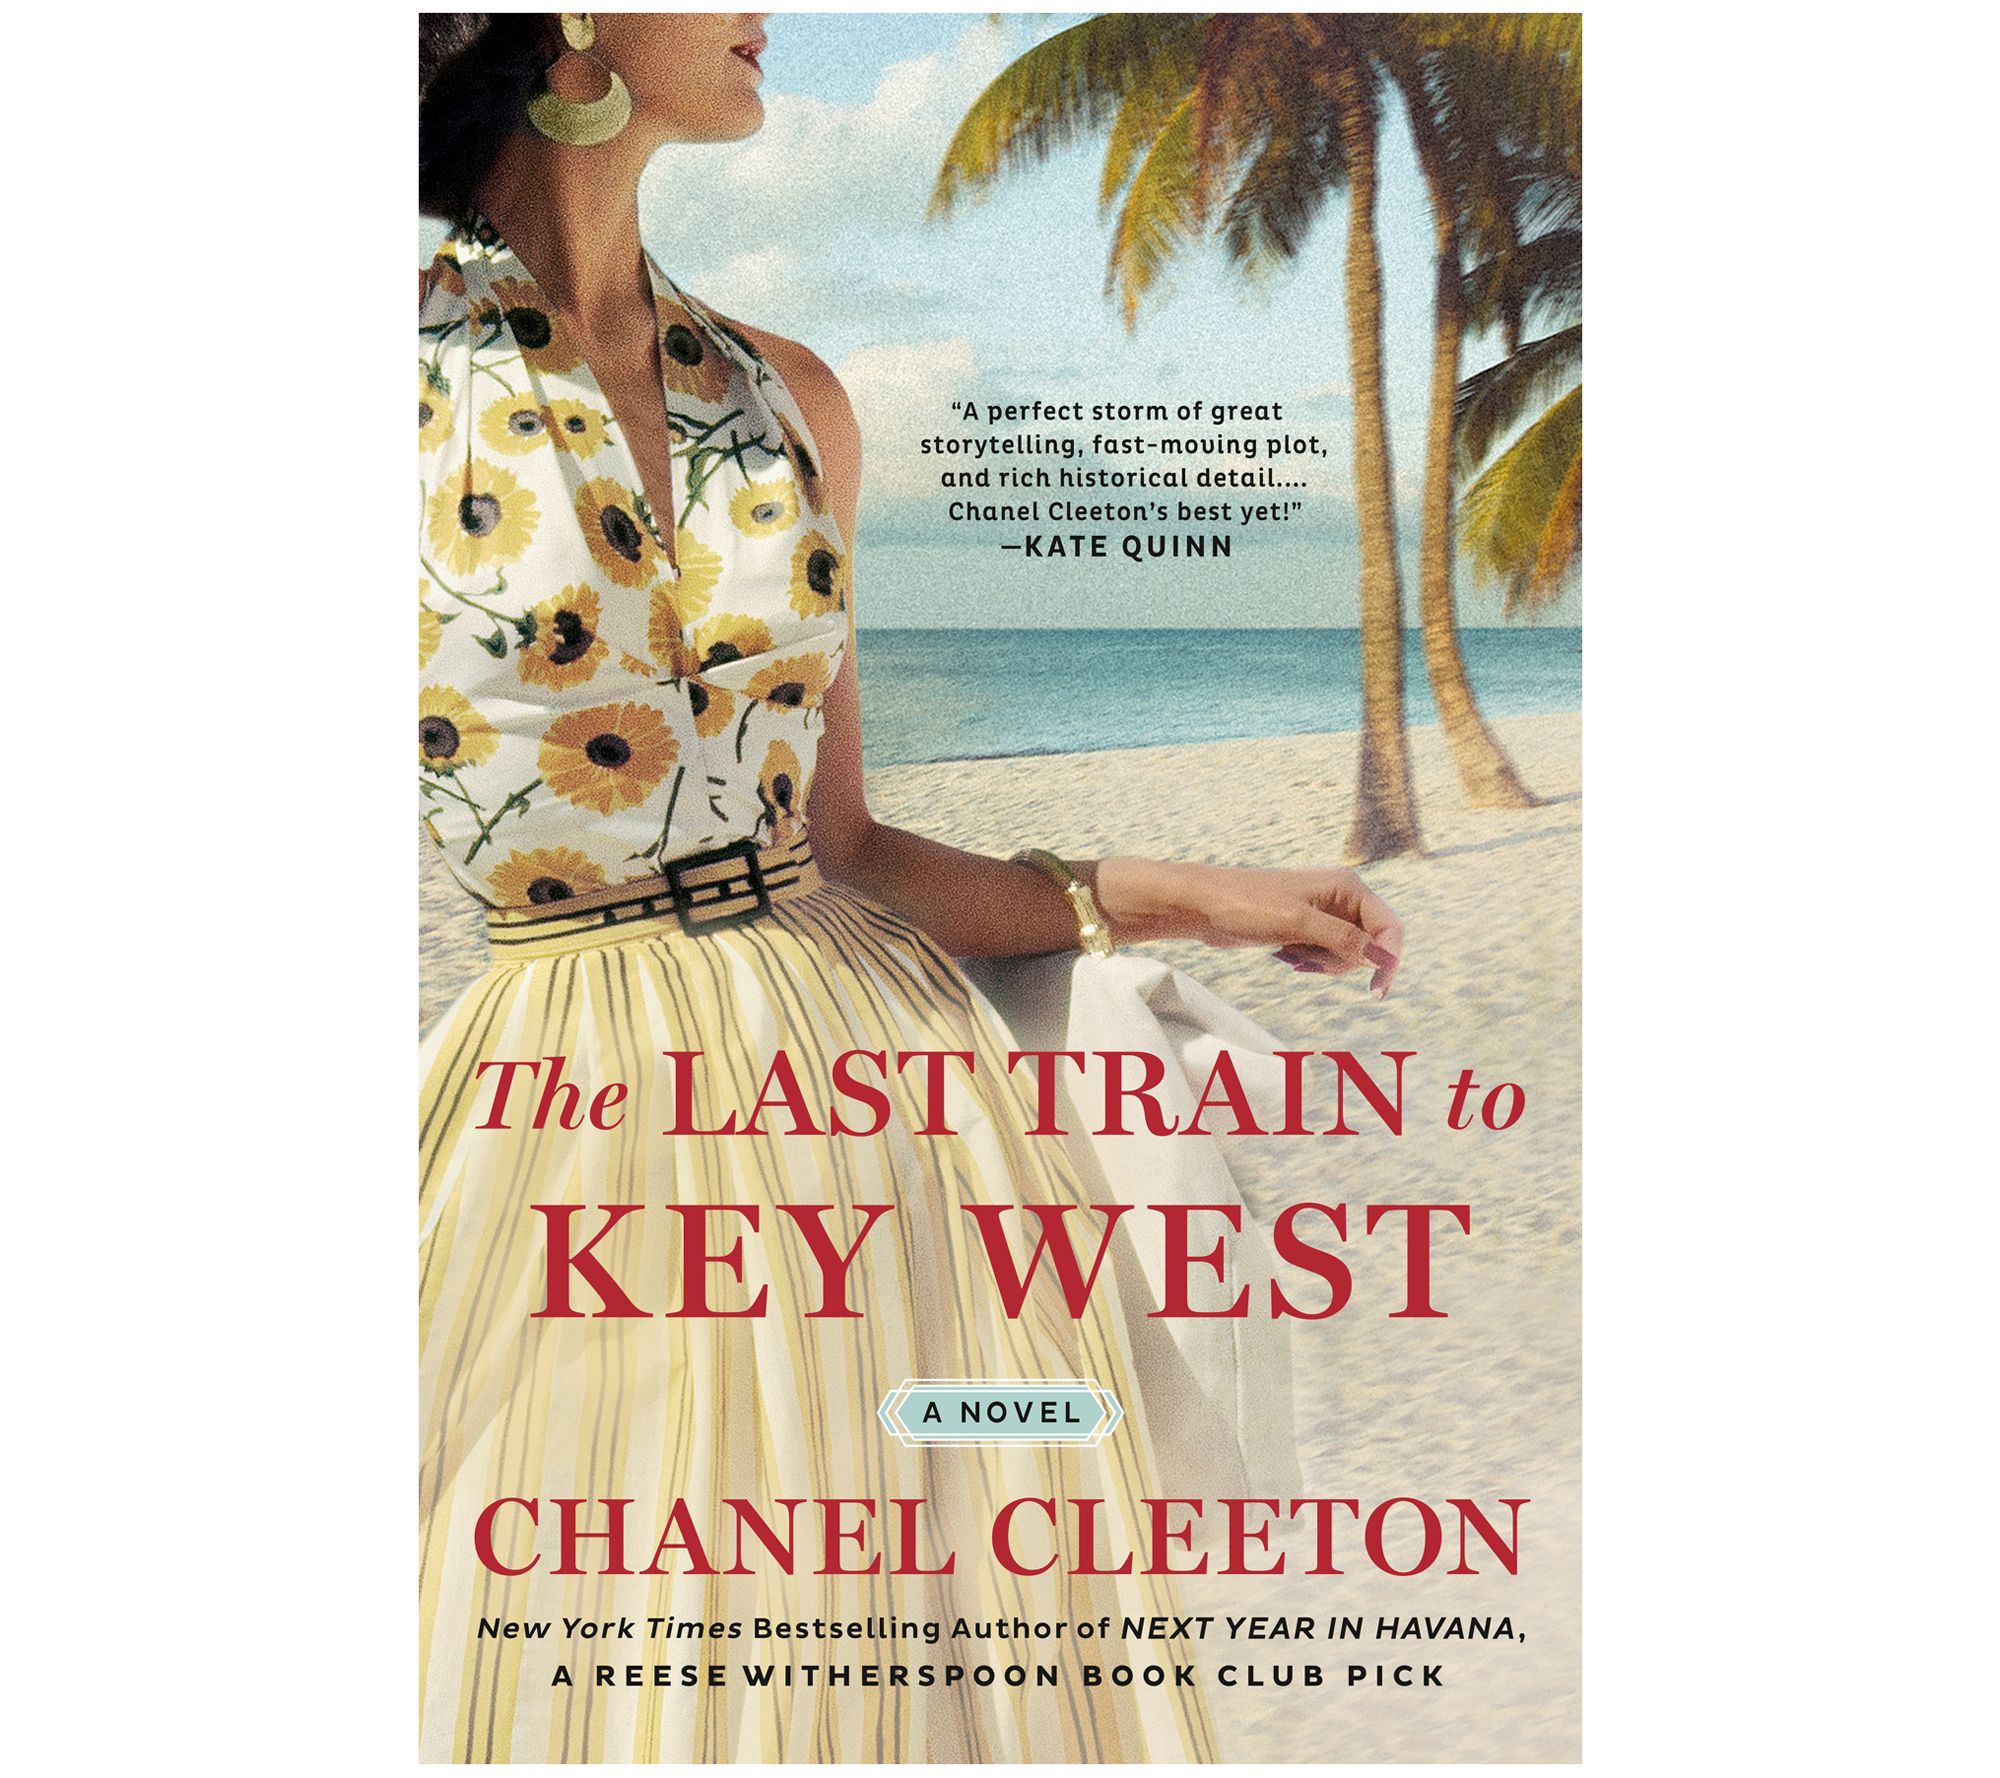 The Last Train to Key West by Chanel Cleeton 